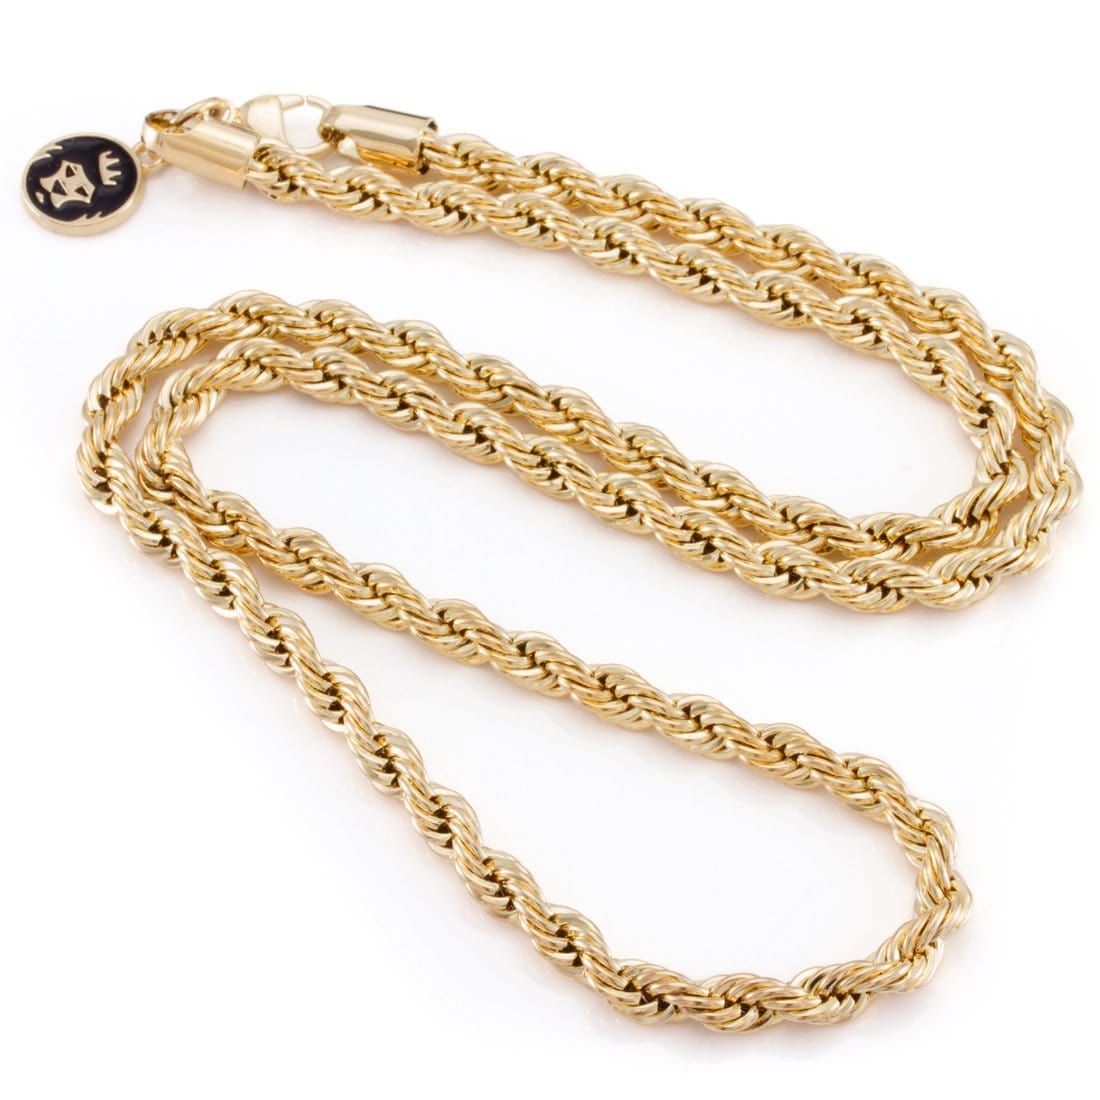 Solid Gold 5mm Rope Chain, Hip Hop Jewelry